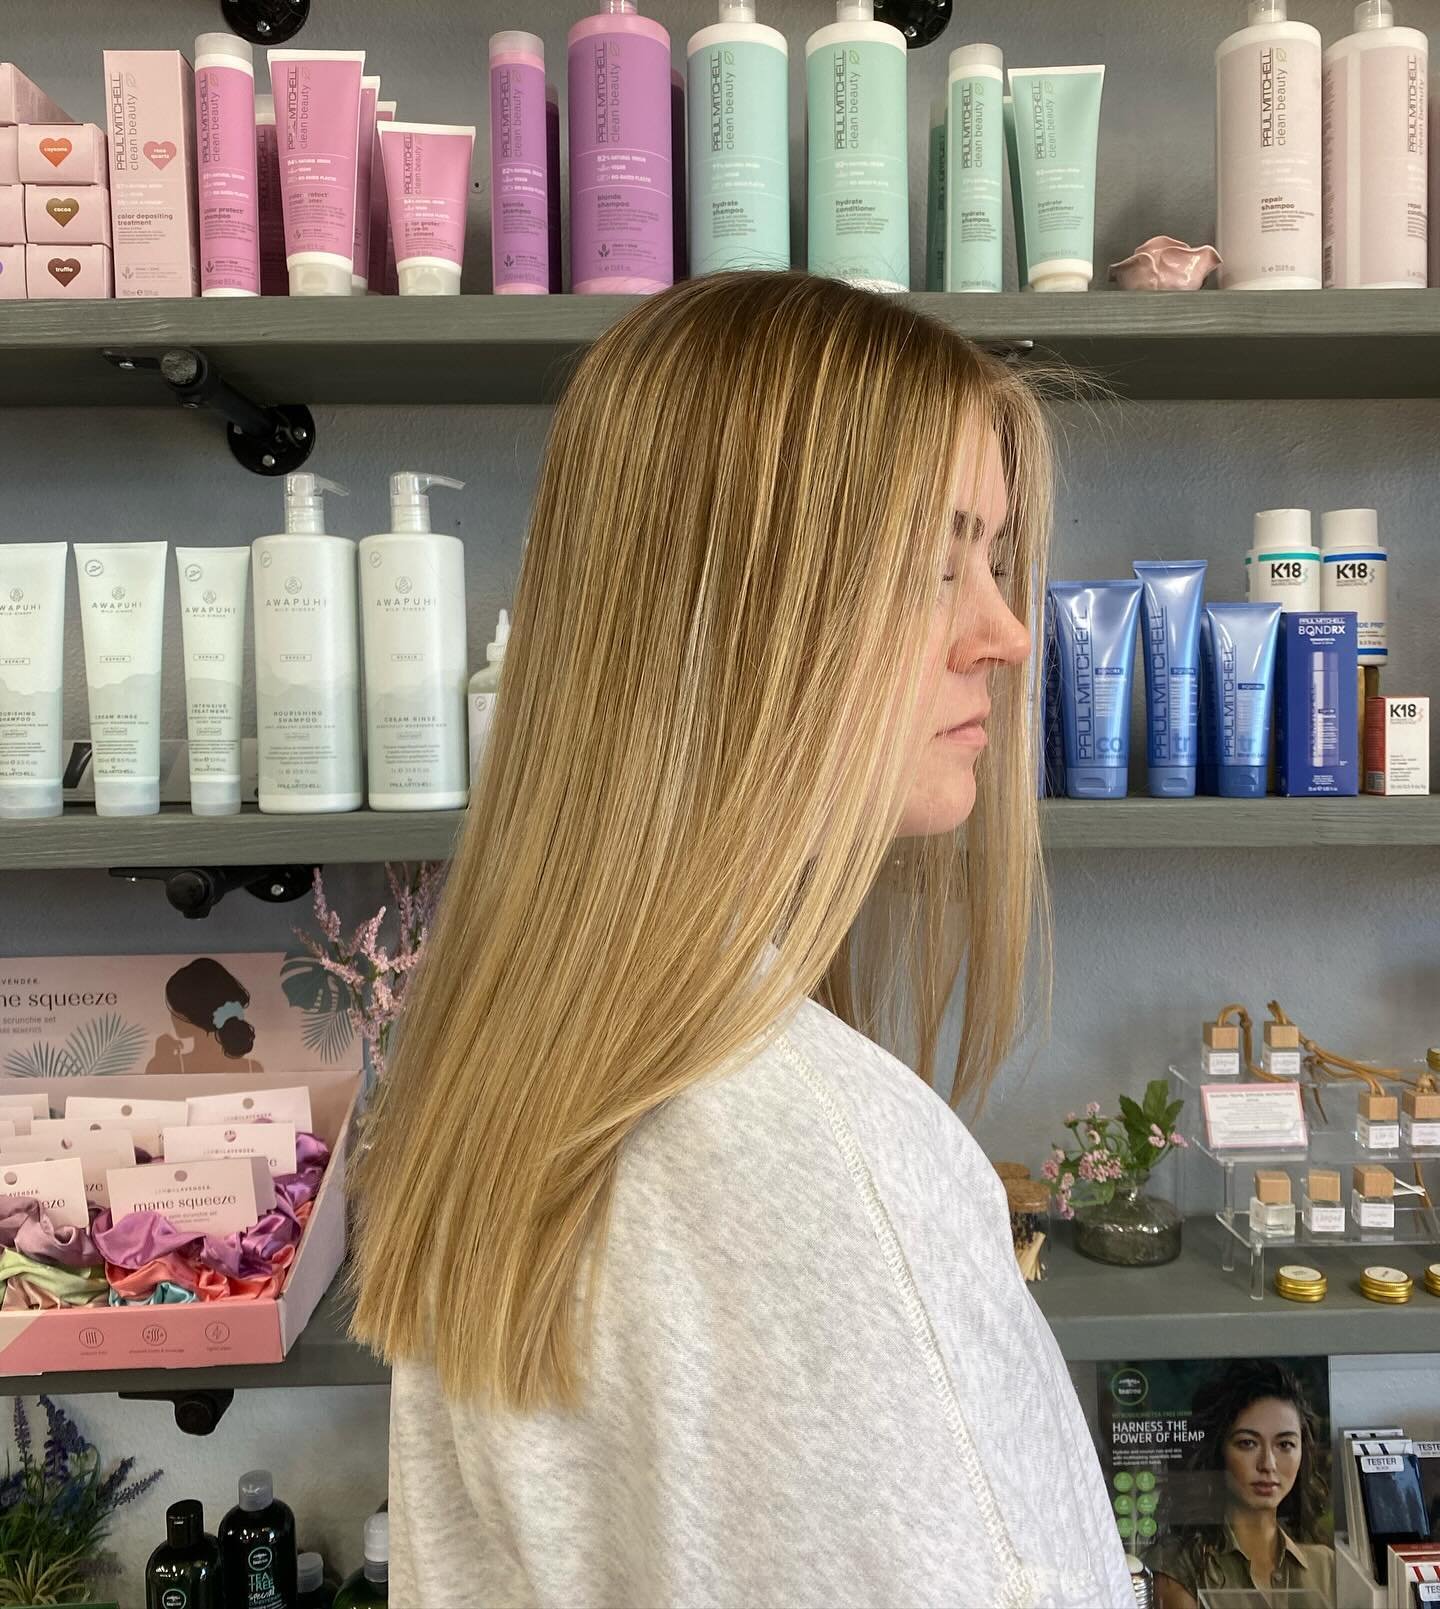 There&rsquo;s nothing like fresh blonde 🤩☀️

Warmer months are around the corner, let&rsquo;s get you bright!! ✨

Hair by @kayhrae 

#personaltouchsalon #sanantoniosalon #sanantoniohair #hairstylist #blondehair #paulmitchell #paulmitchellsalon #k18 